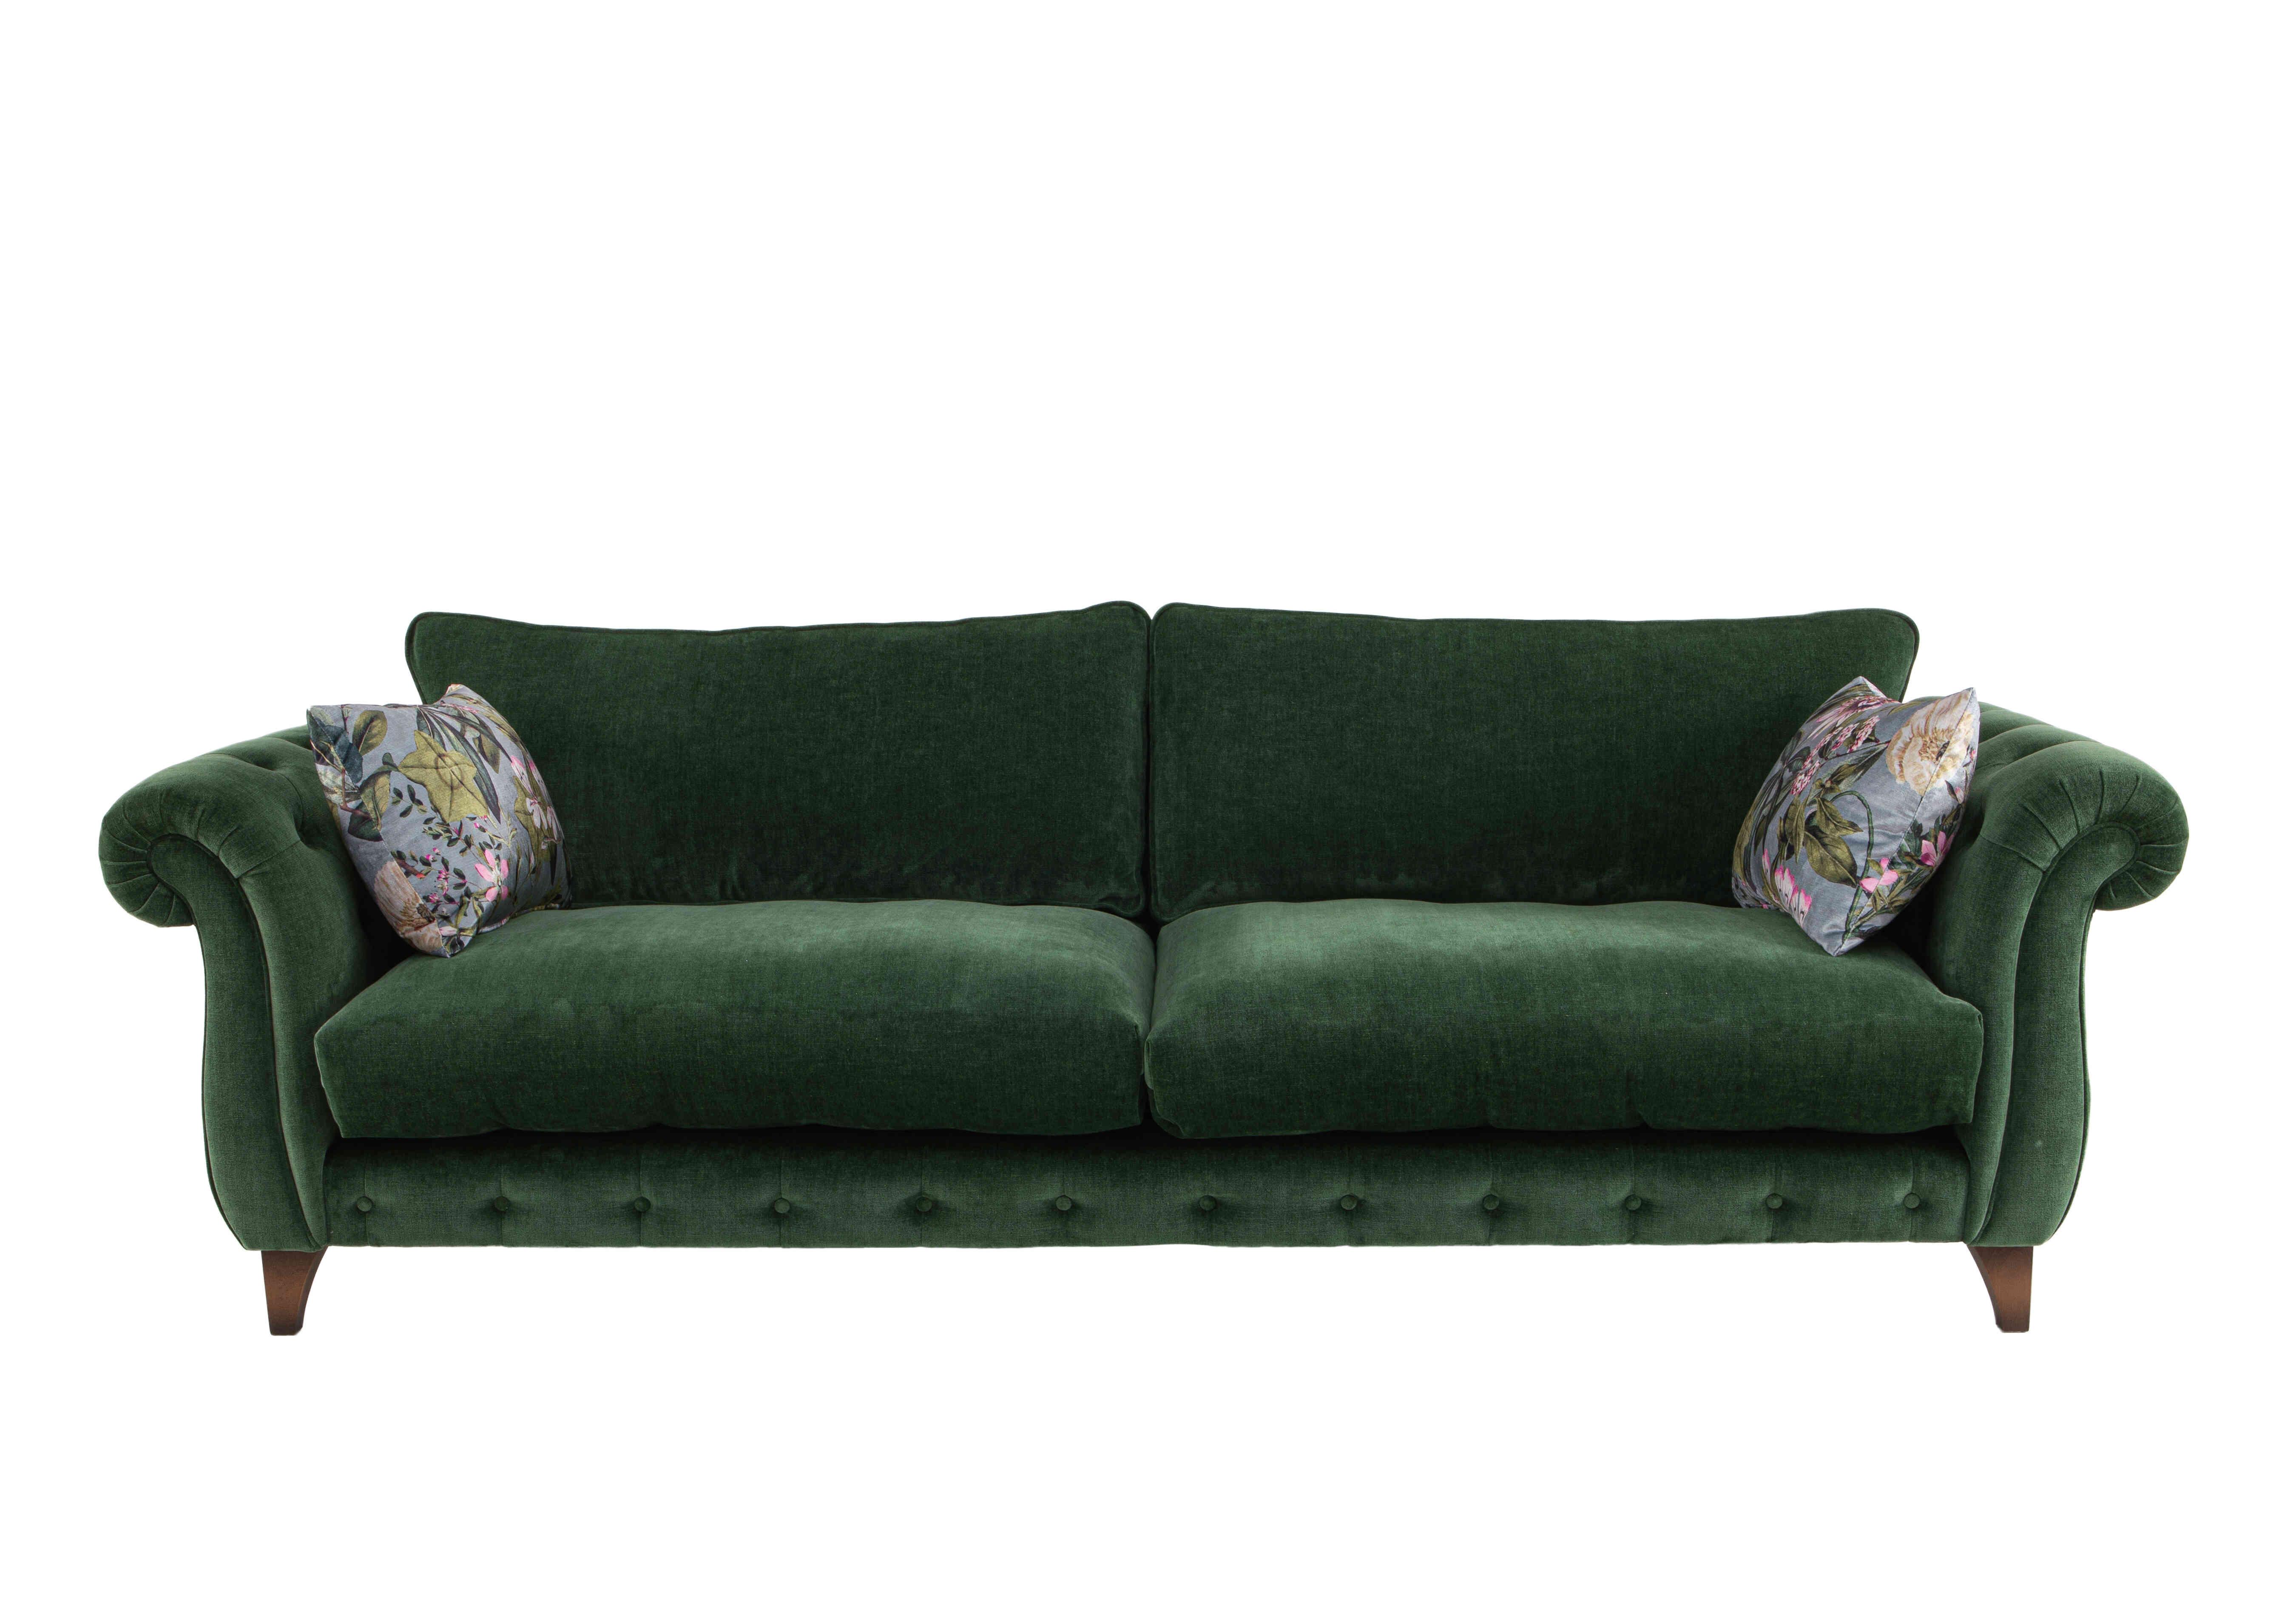 Boutique Palace Fabric 4 Seater Classic Back Sofa in Oasis Parrot on Furniture Village